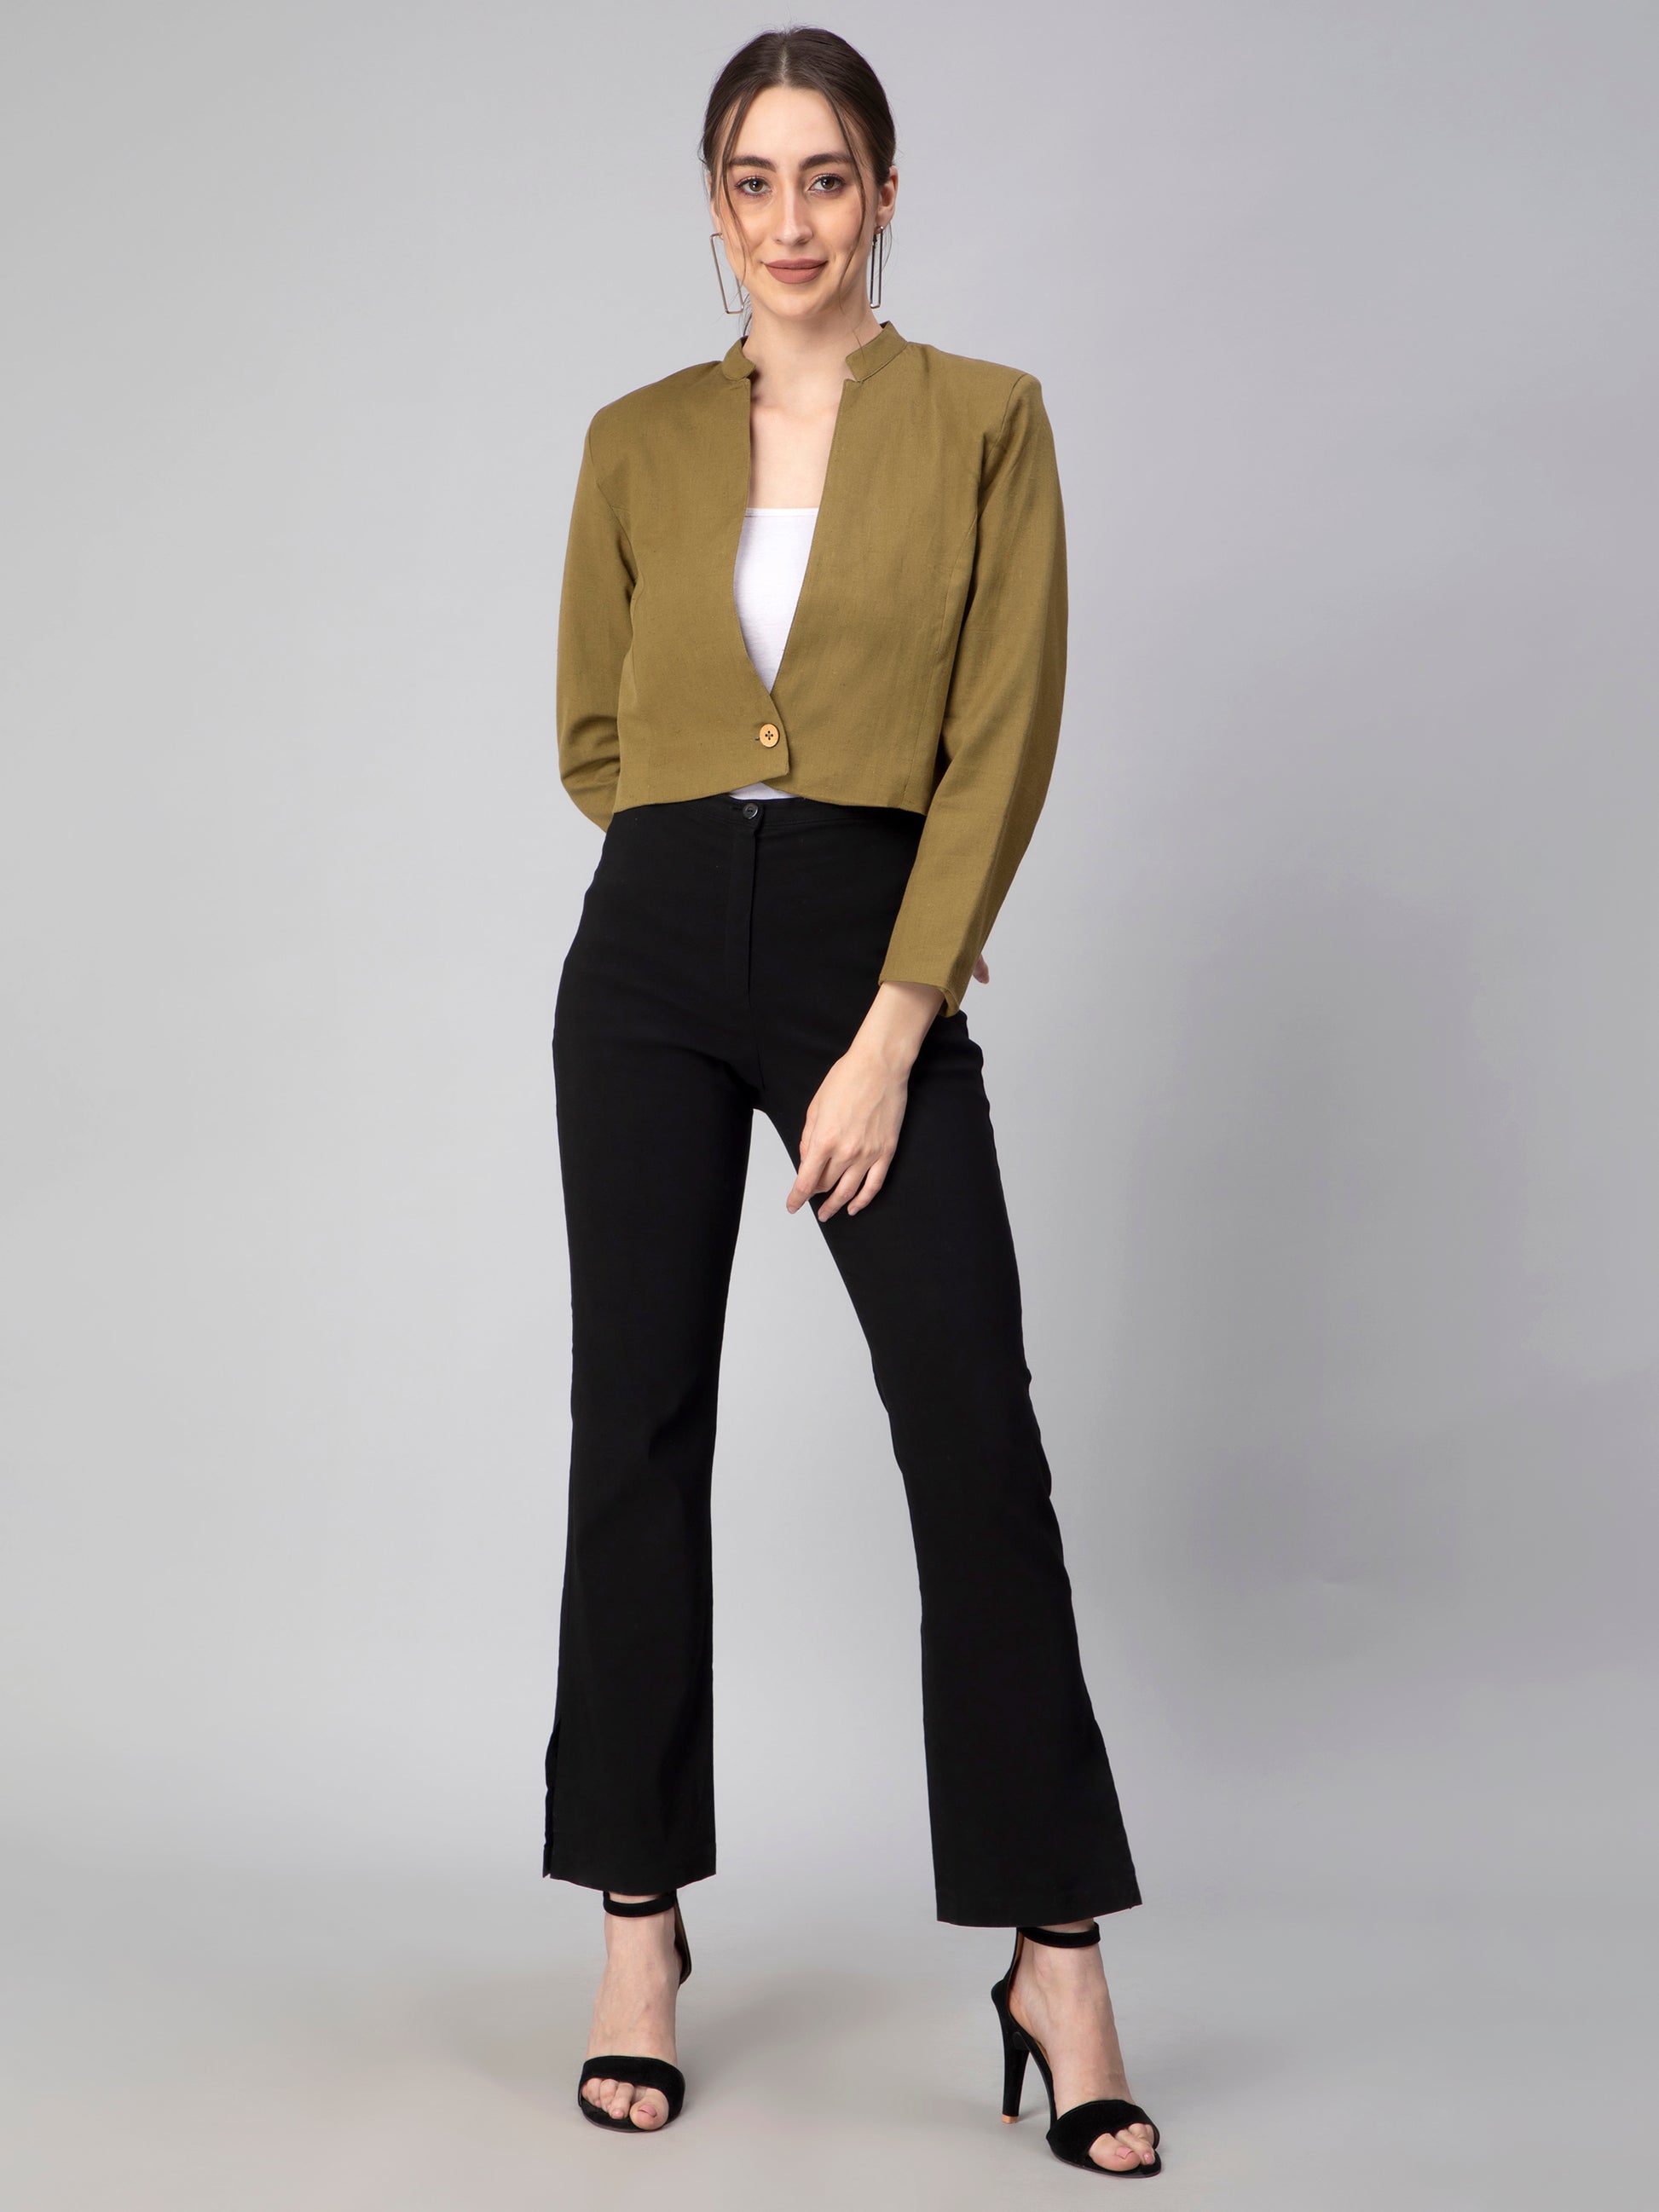 A picture of Green Blazer In Pure Cotton, womens workwear standing against a grey background looking sideways